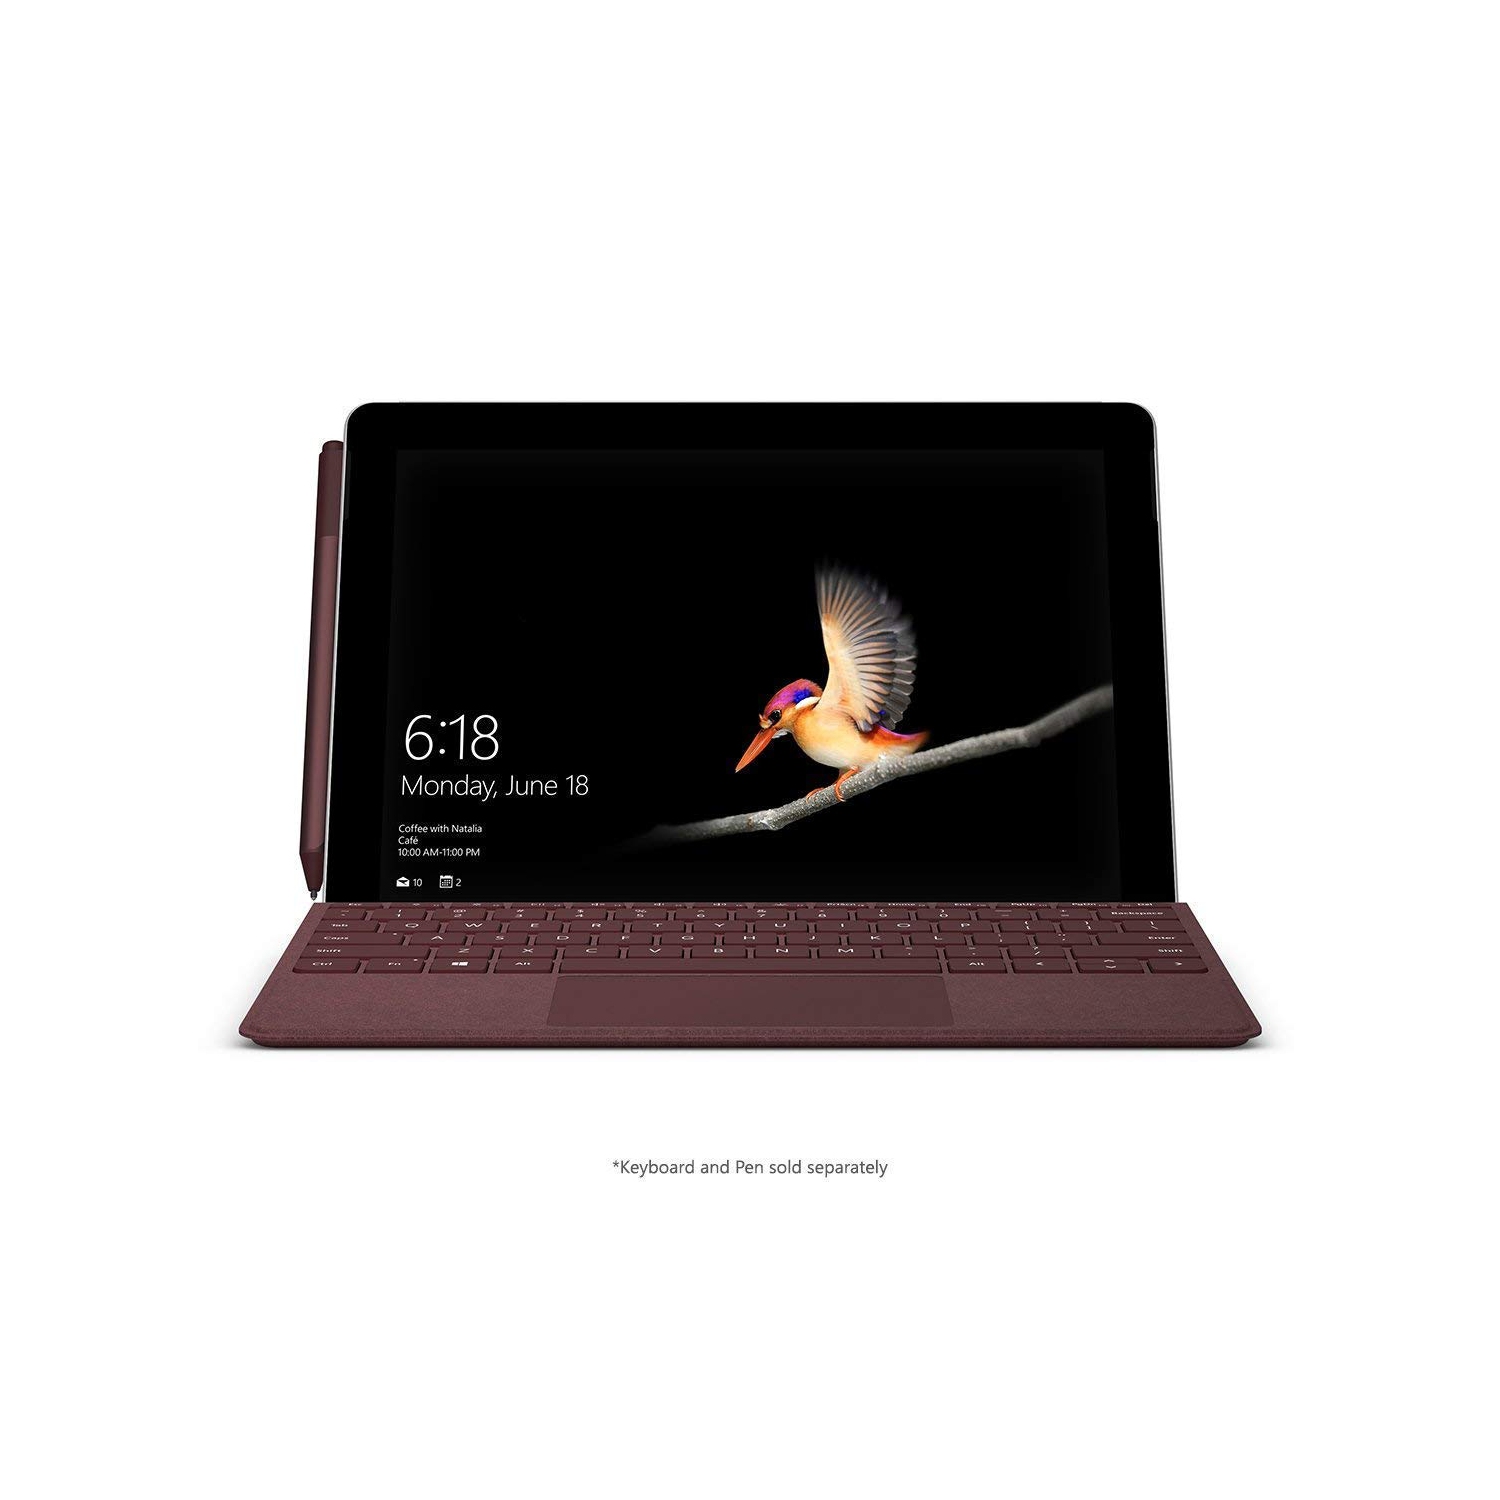 Refurbished (Excellent) - Microsoft Surface Go 10" Touchscreen Intel 4GB 128GB SSD Windows 10 Tablet PC